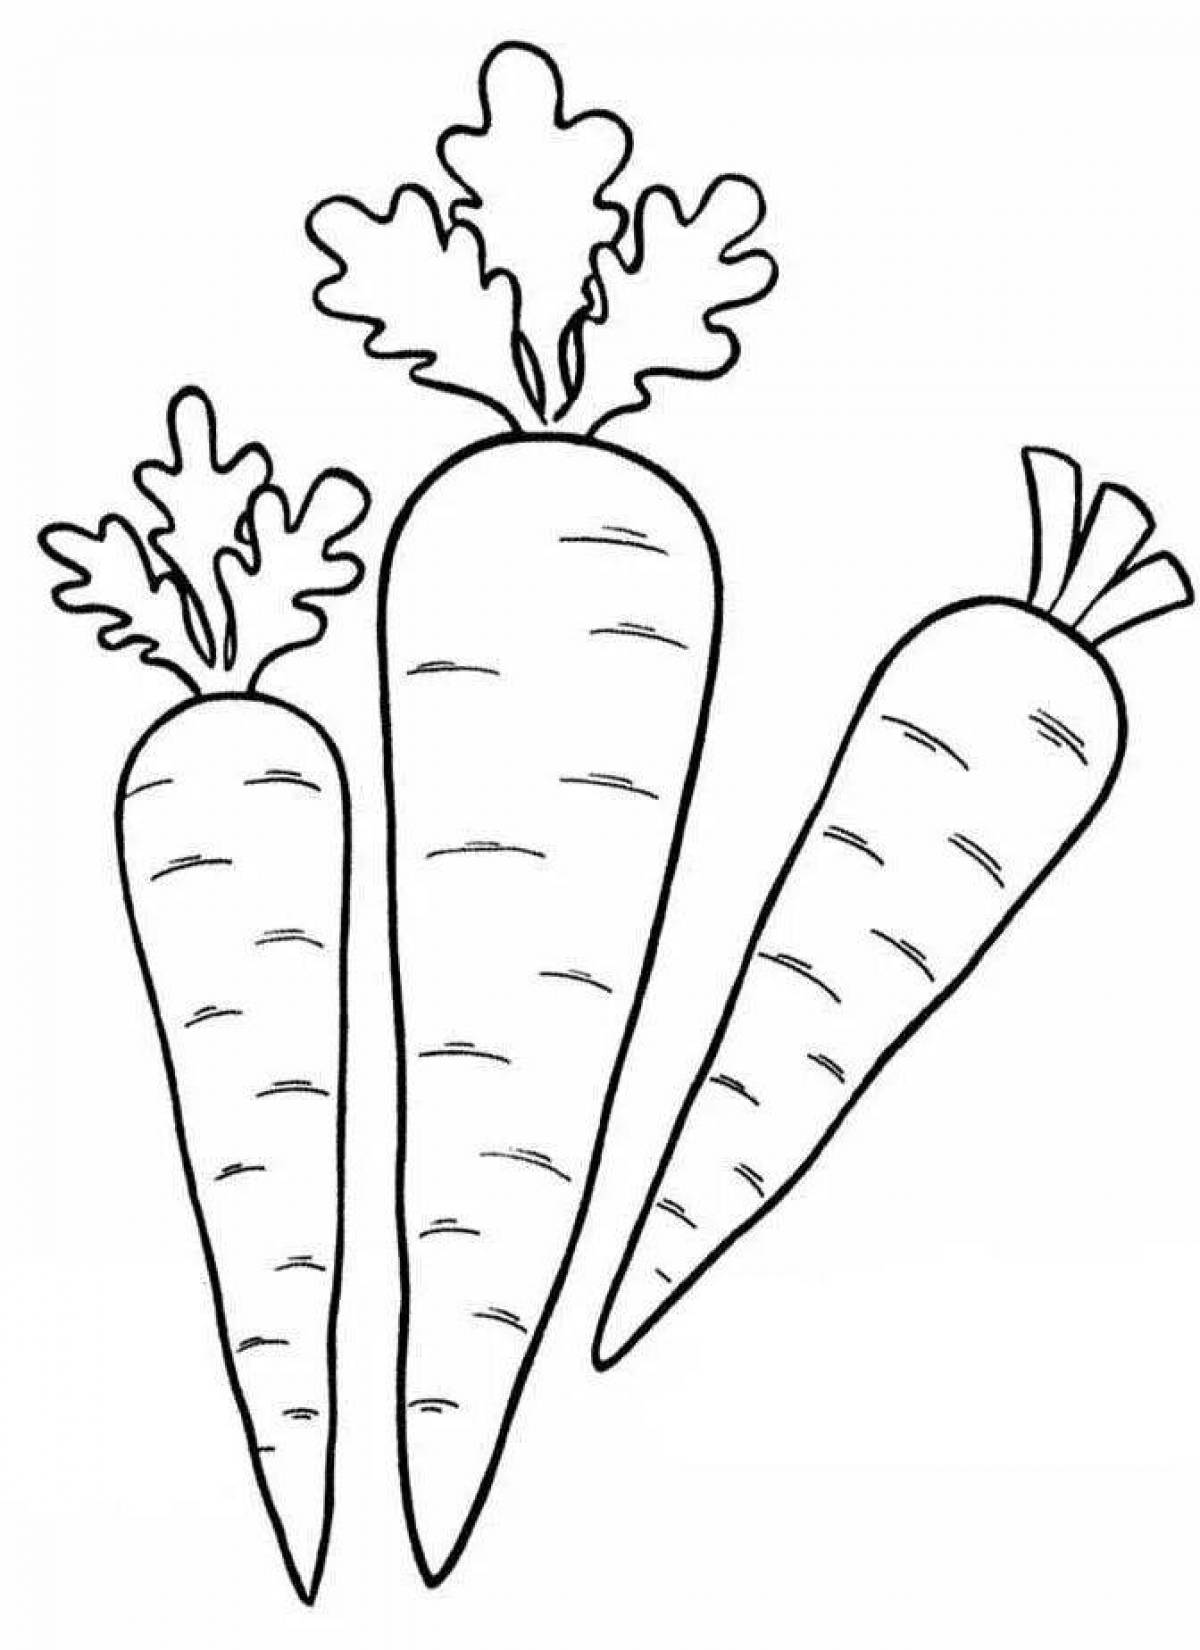 Animated sketch of a carrot